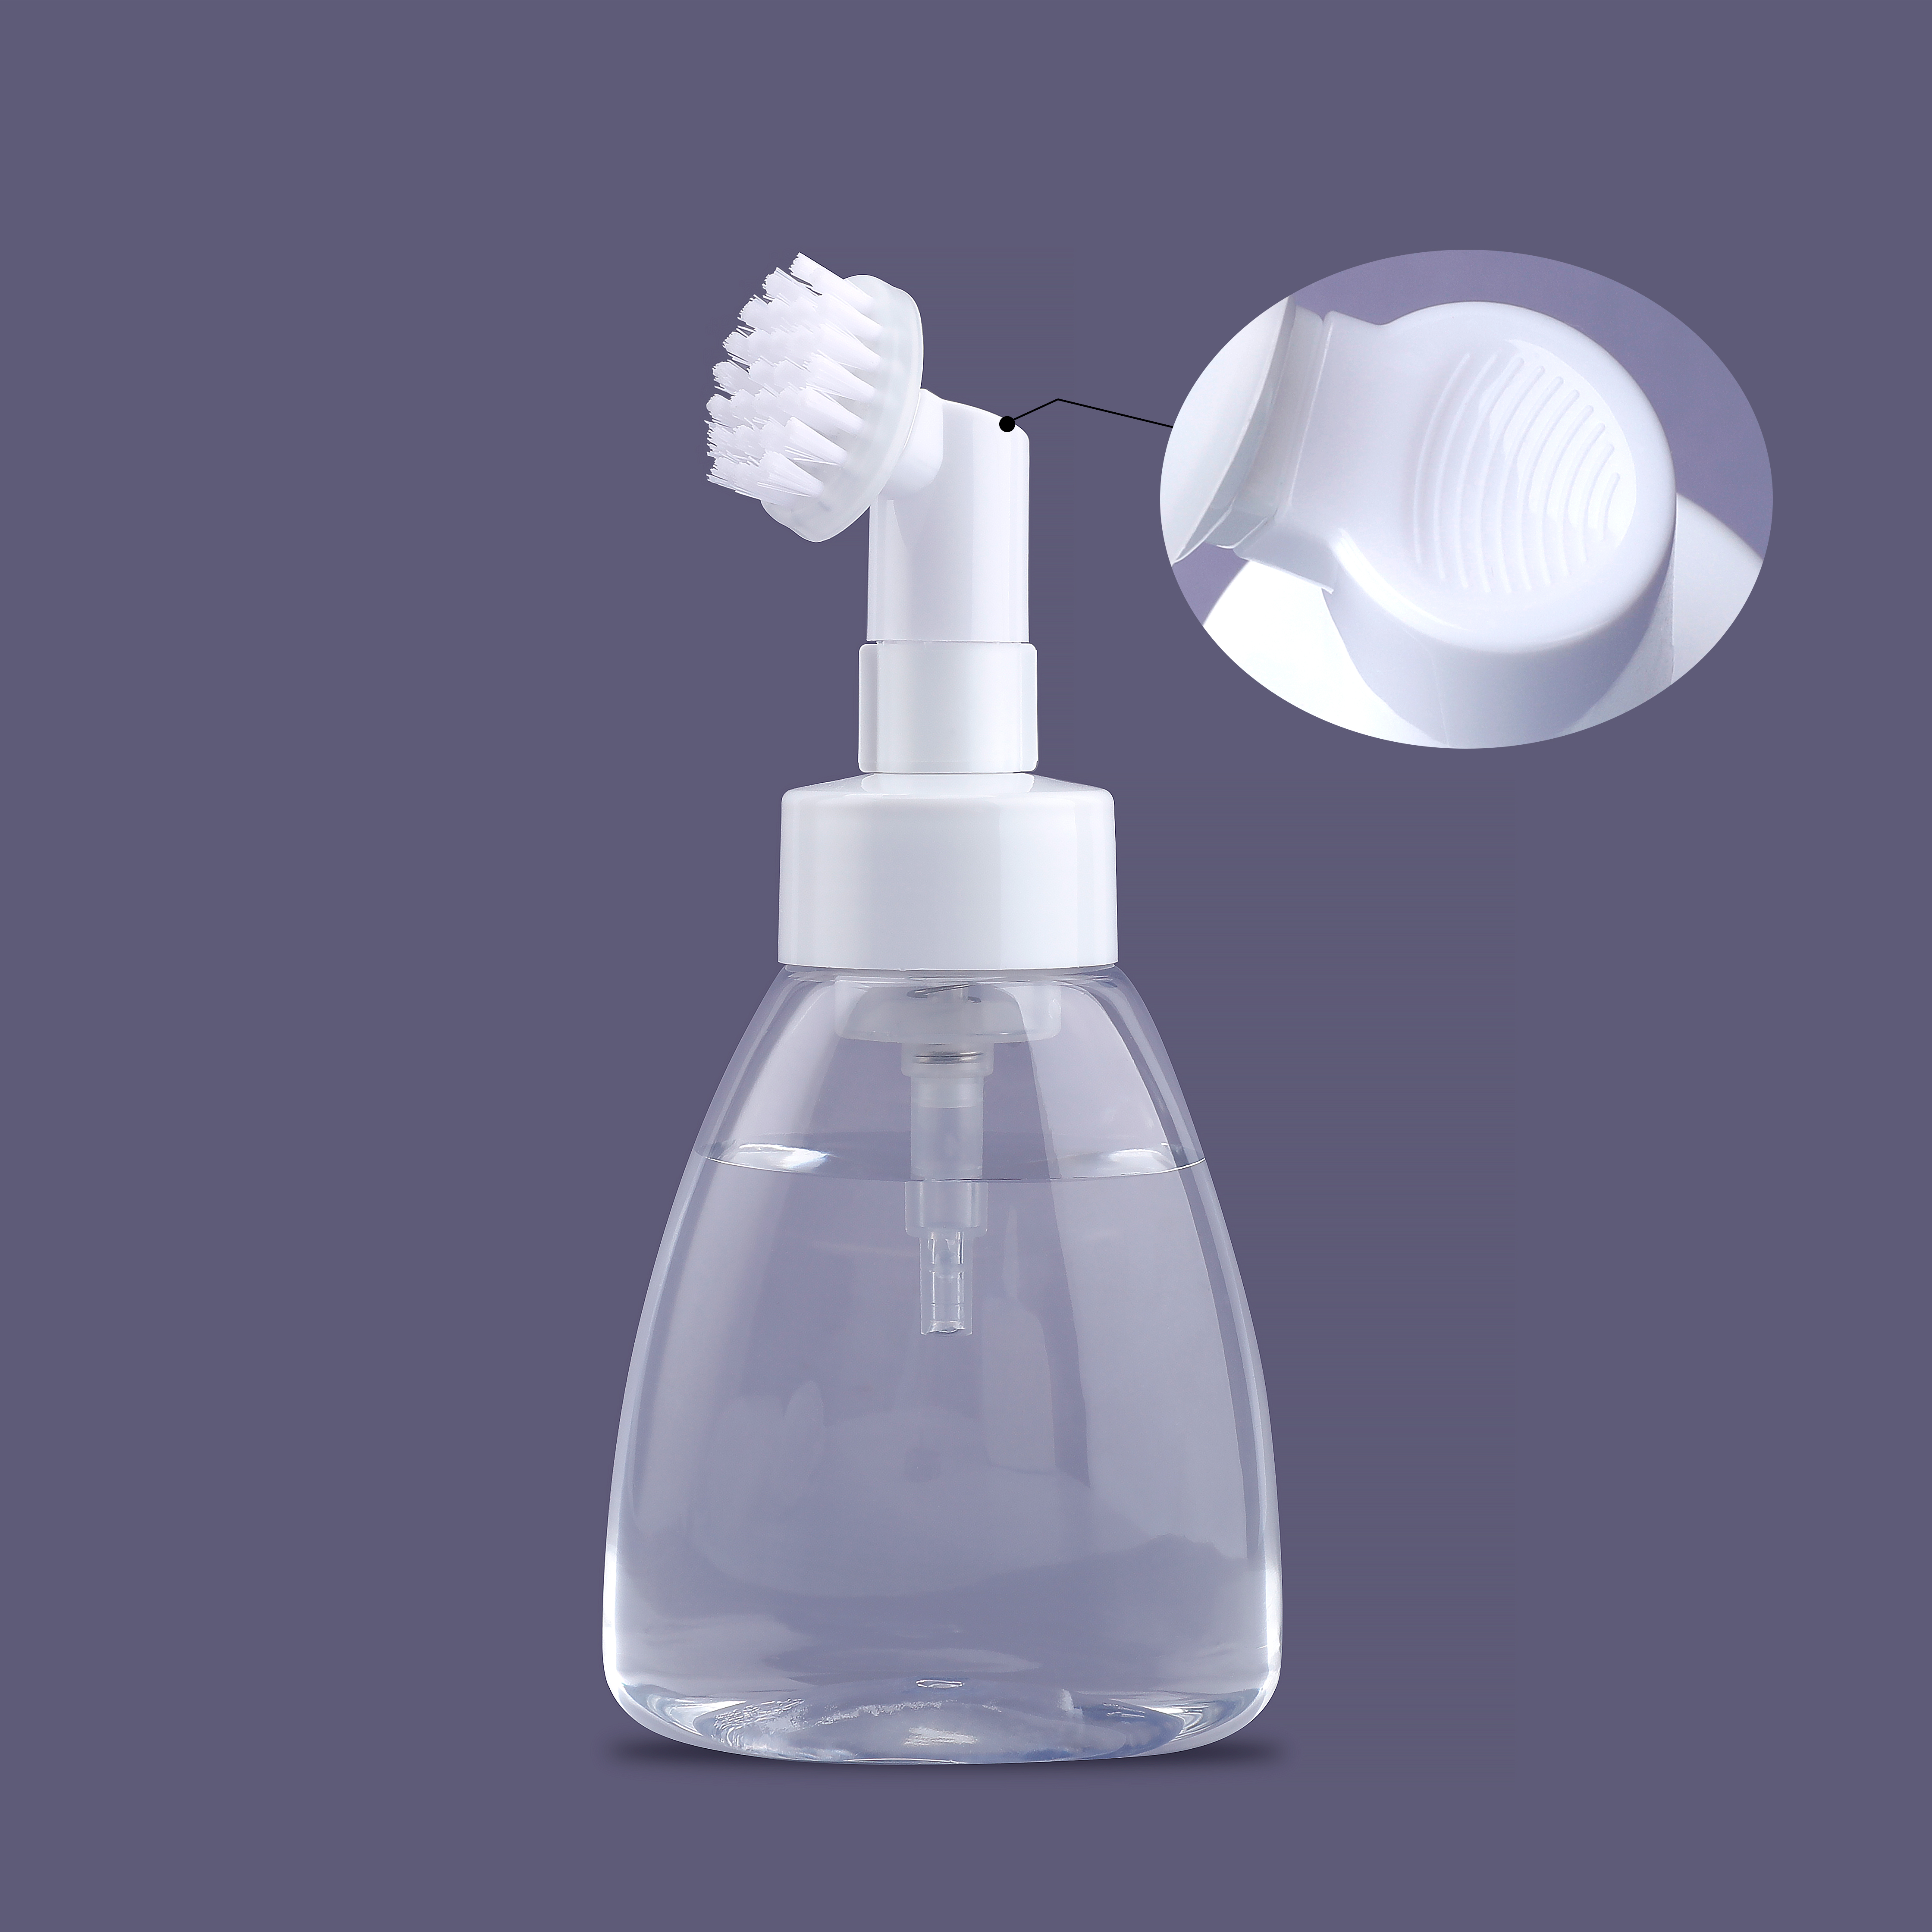 Eco-friendly Private Label Custom Logo And Label 0.8cc/1.6cc 42/410 Plastic Transparency Built-in Spring Biodegradable Foam Pump Bottle With Silicone Brush And Lock